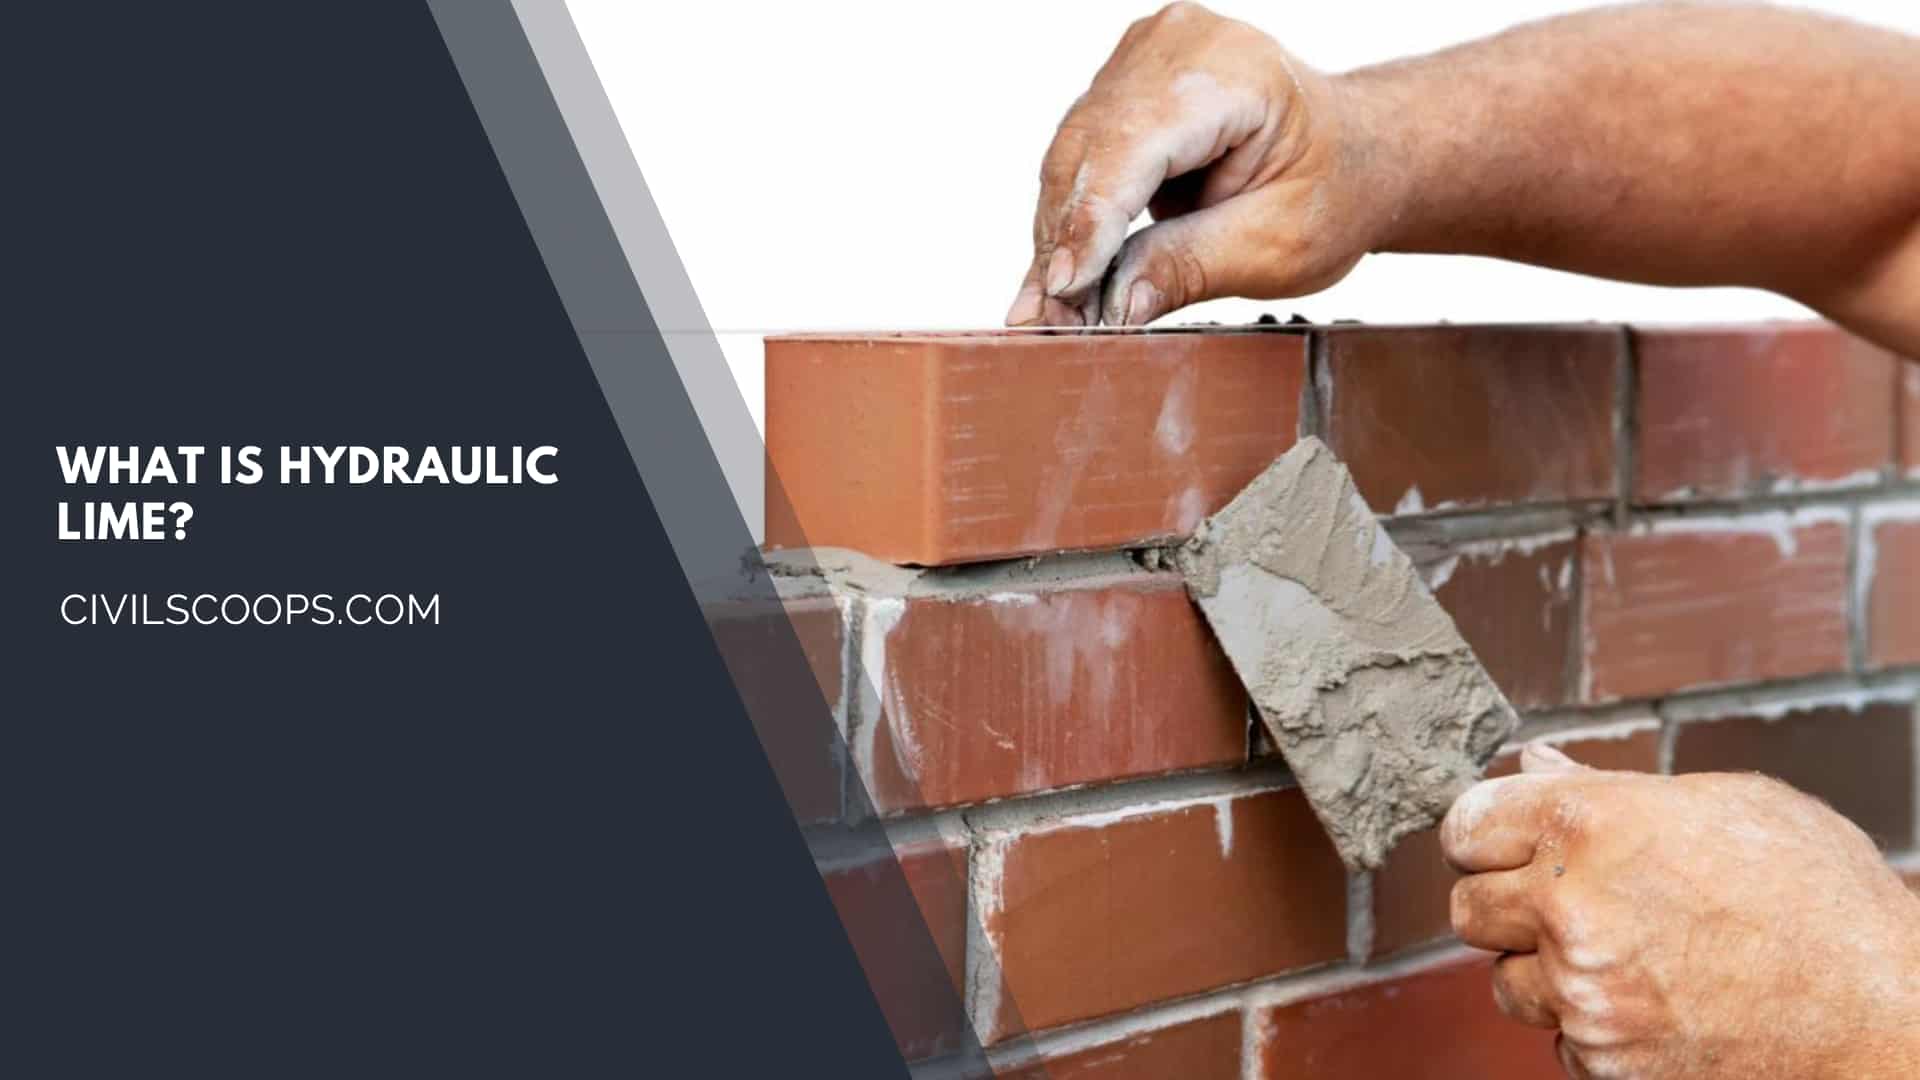 What Is Hydraulic Lime?